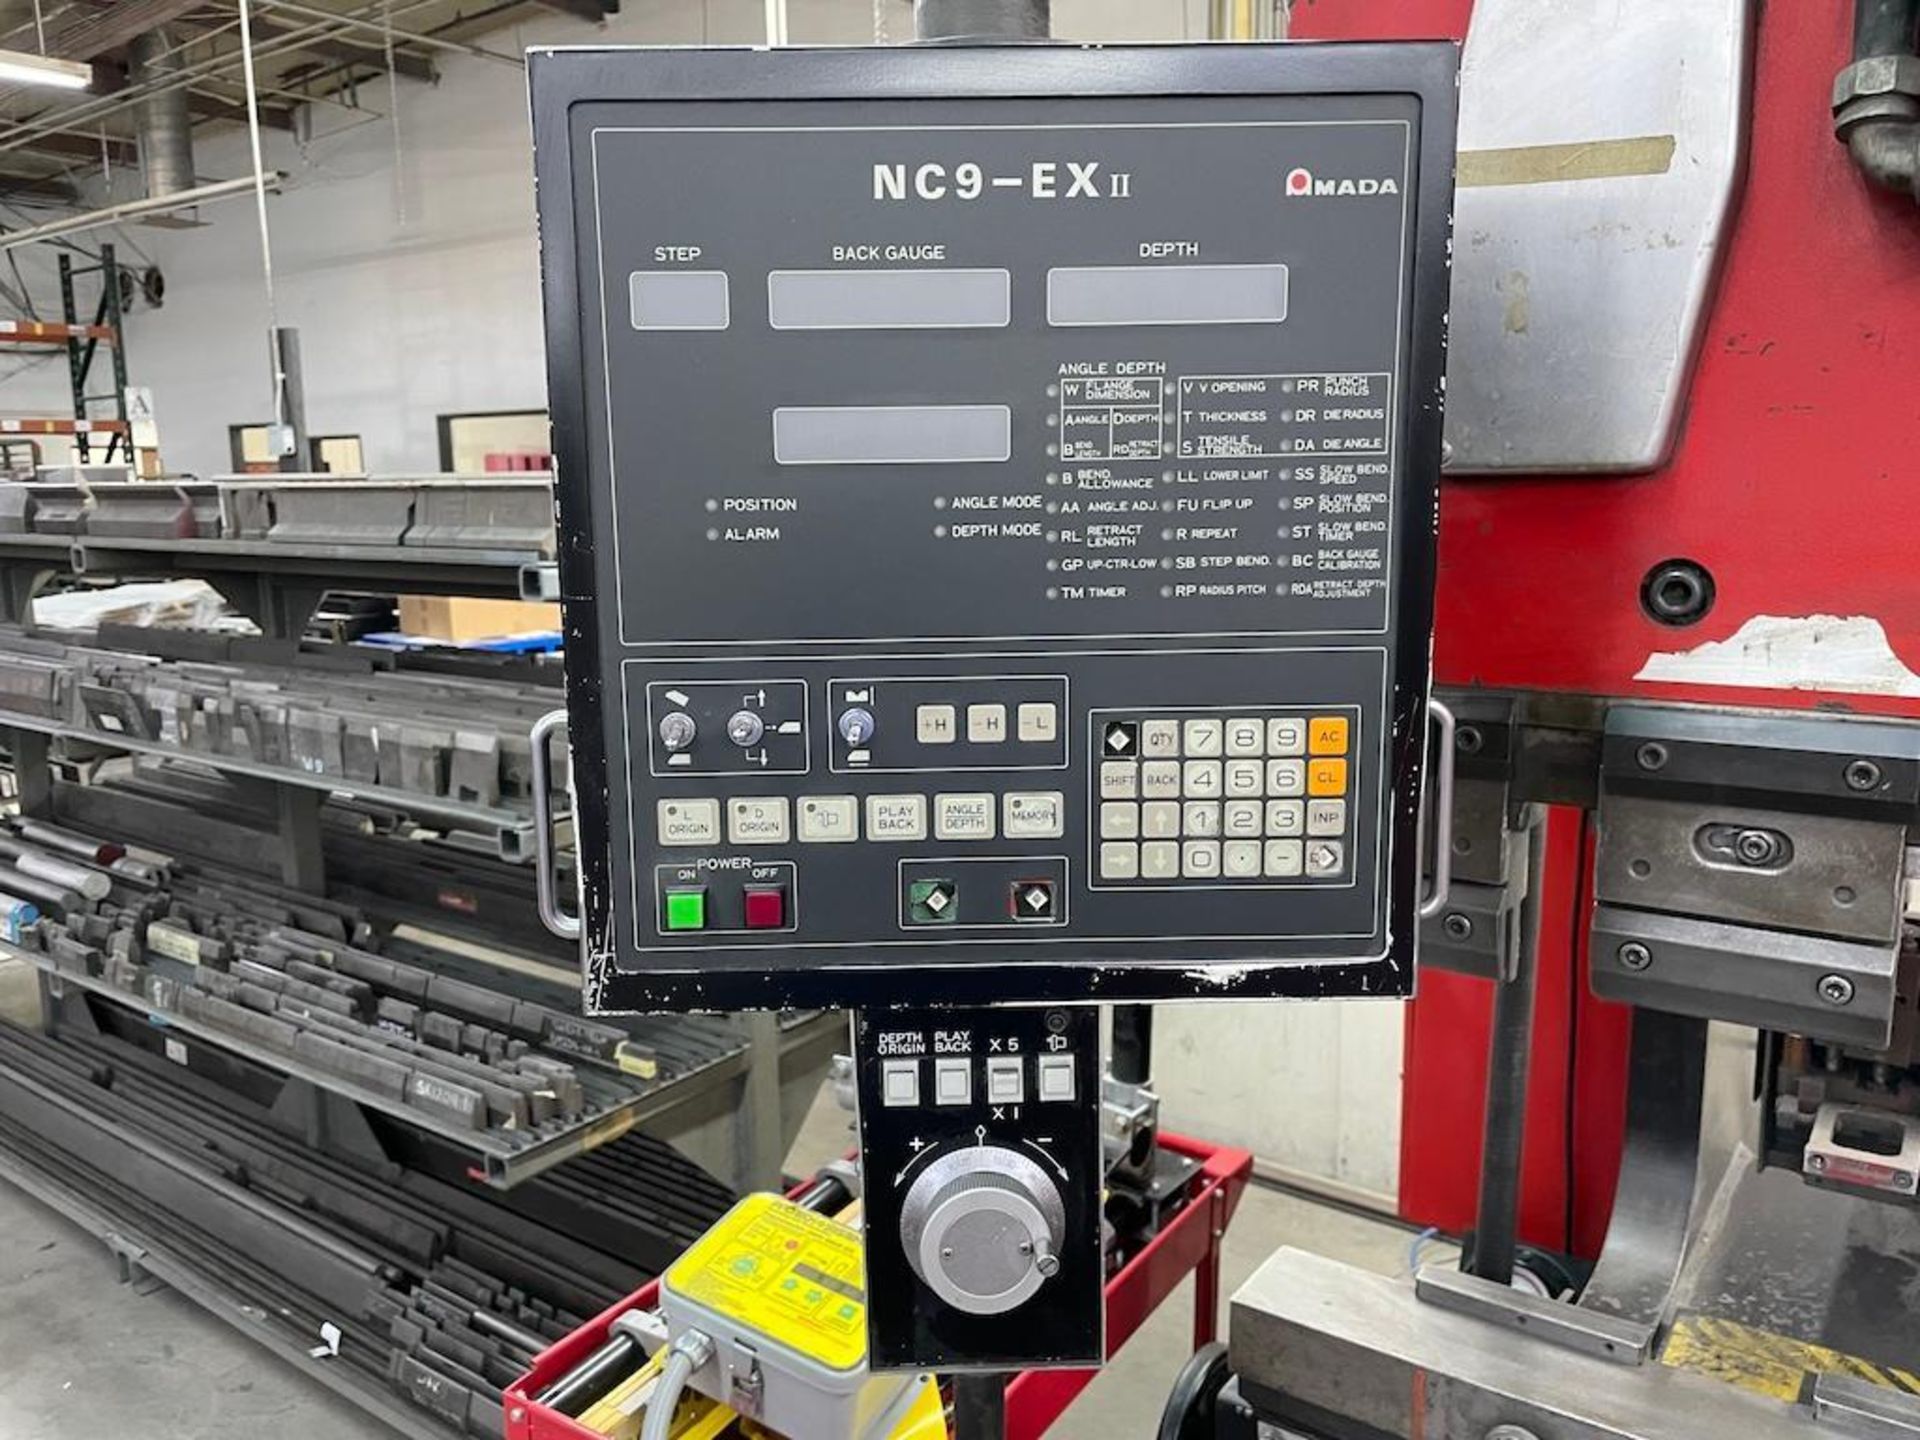 AMADA RG-125 PRESS BRAKE, 125 TON, 118.2 IN TABLE LENGTH, NC9-EXII CONTROL, 2 AXIS BACK GAUGE, 118.2 - Image 2 of 9